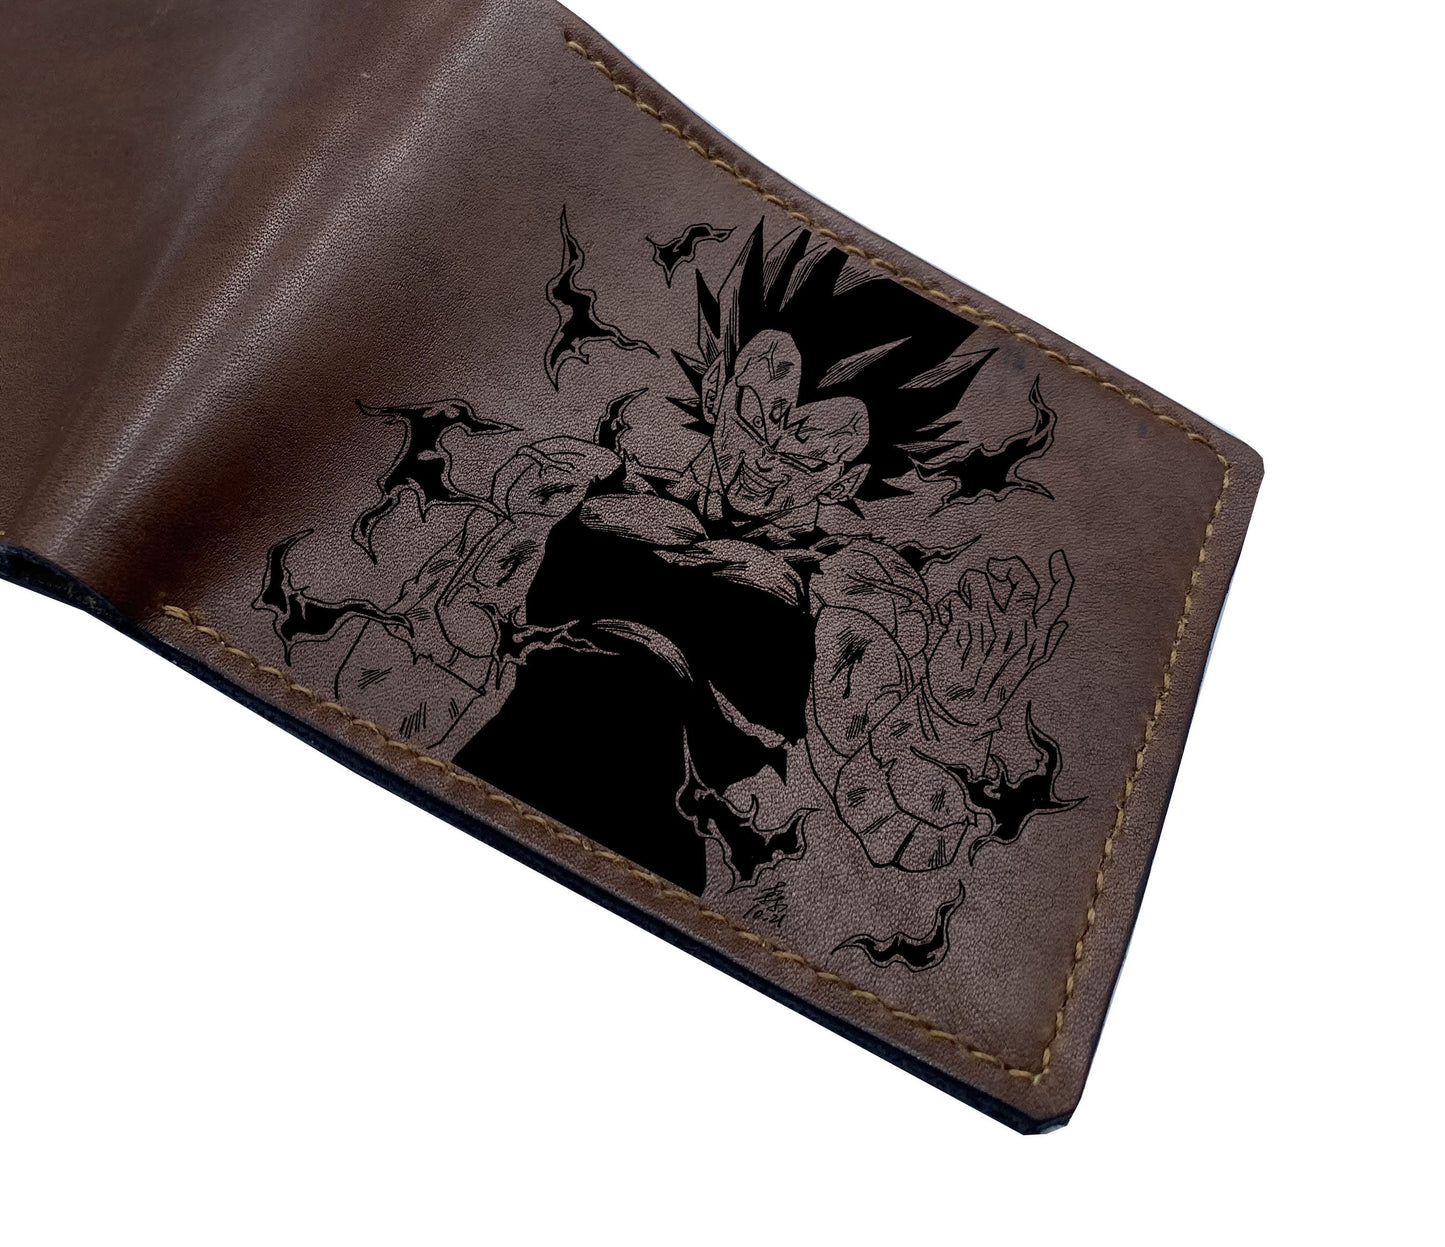 Mayan Corner - Dragon ball characters drawing leather wallet, fan art leather gift for men, wallet for him, leather anniversary present ideas - Vegeta super saiyan